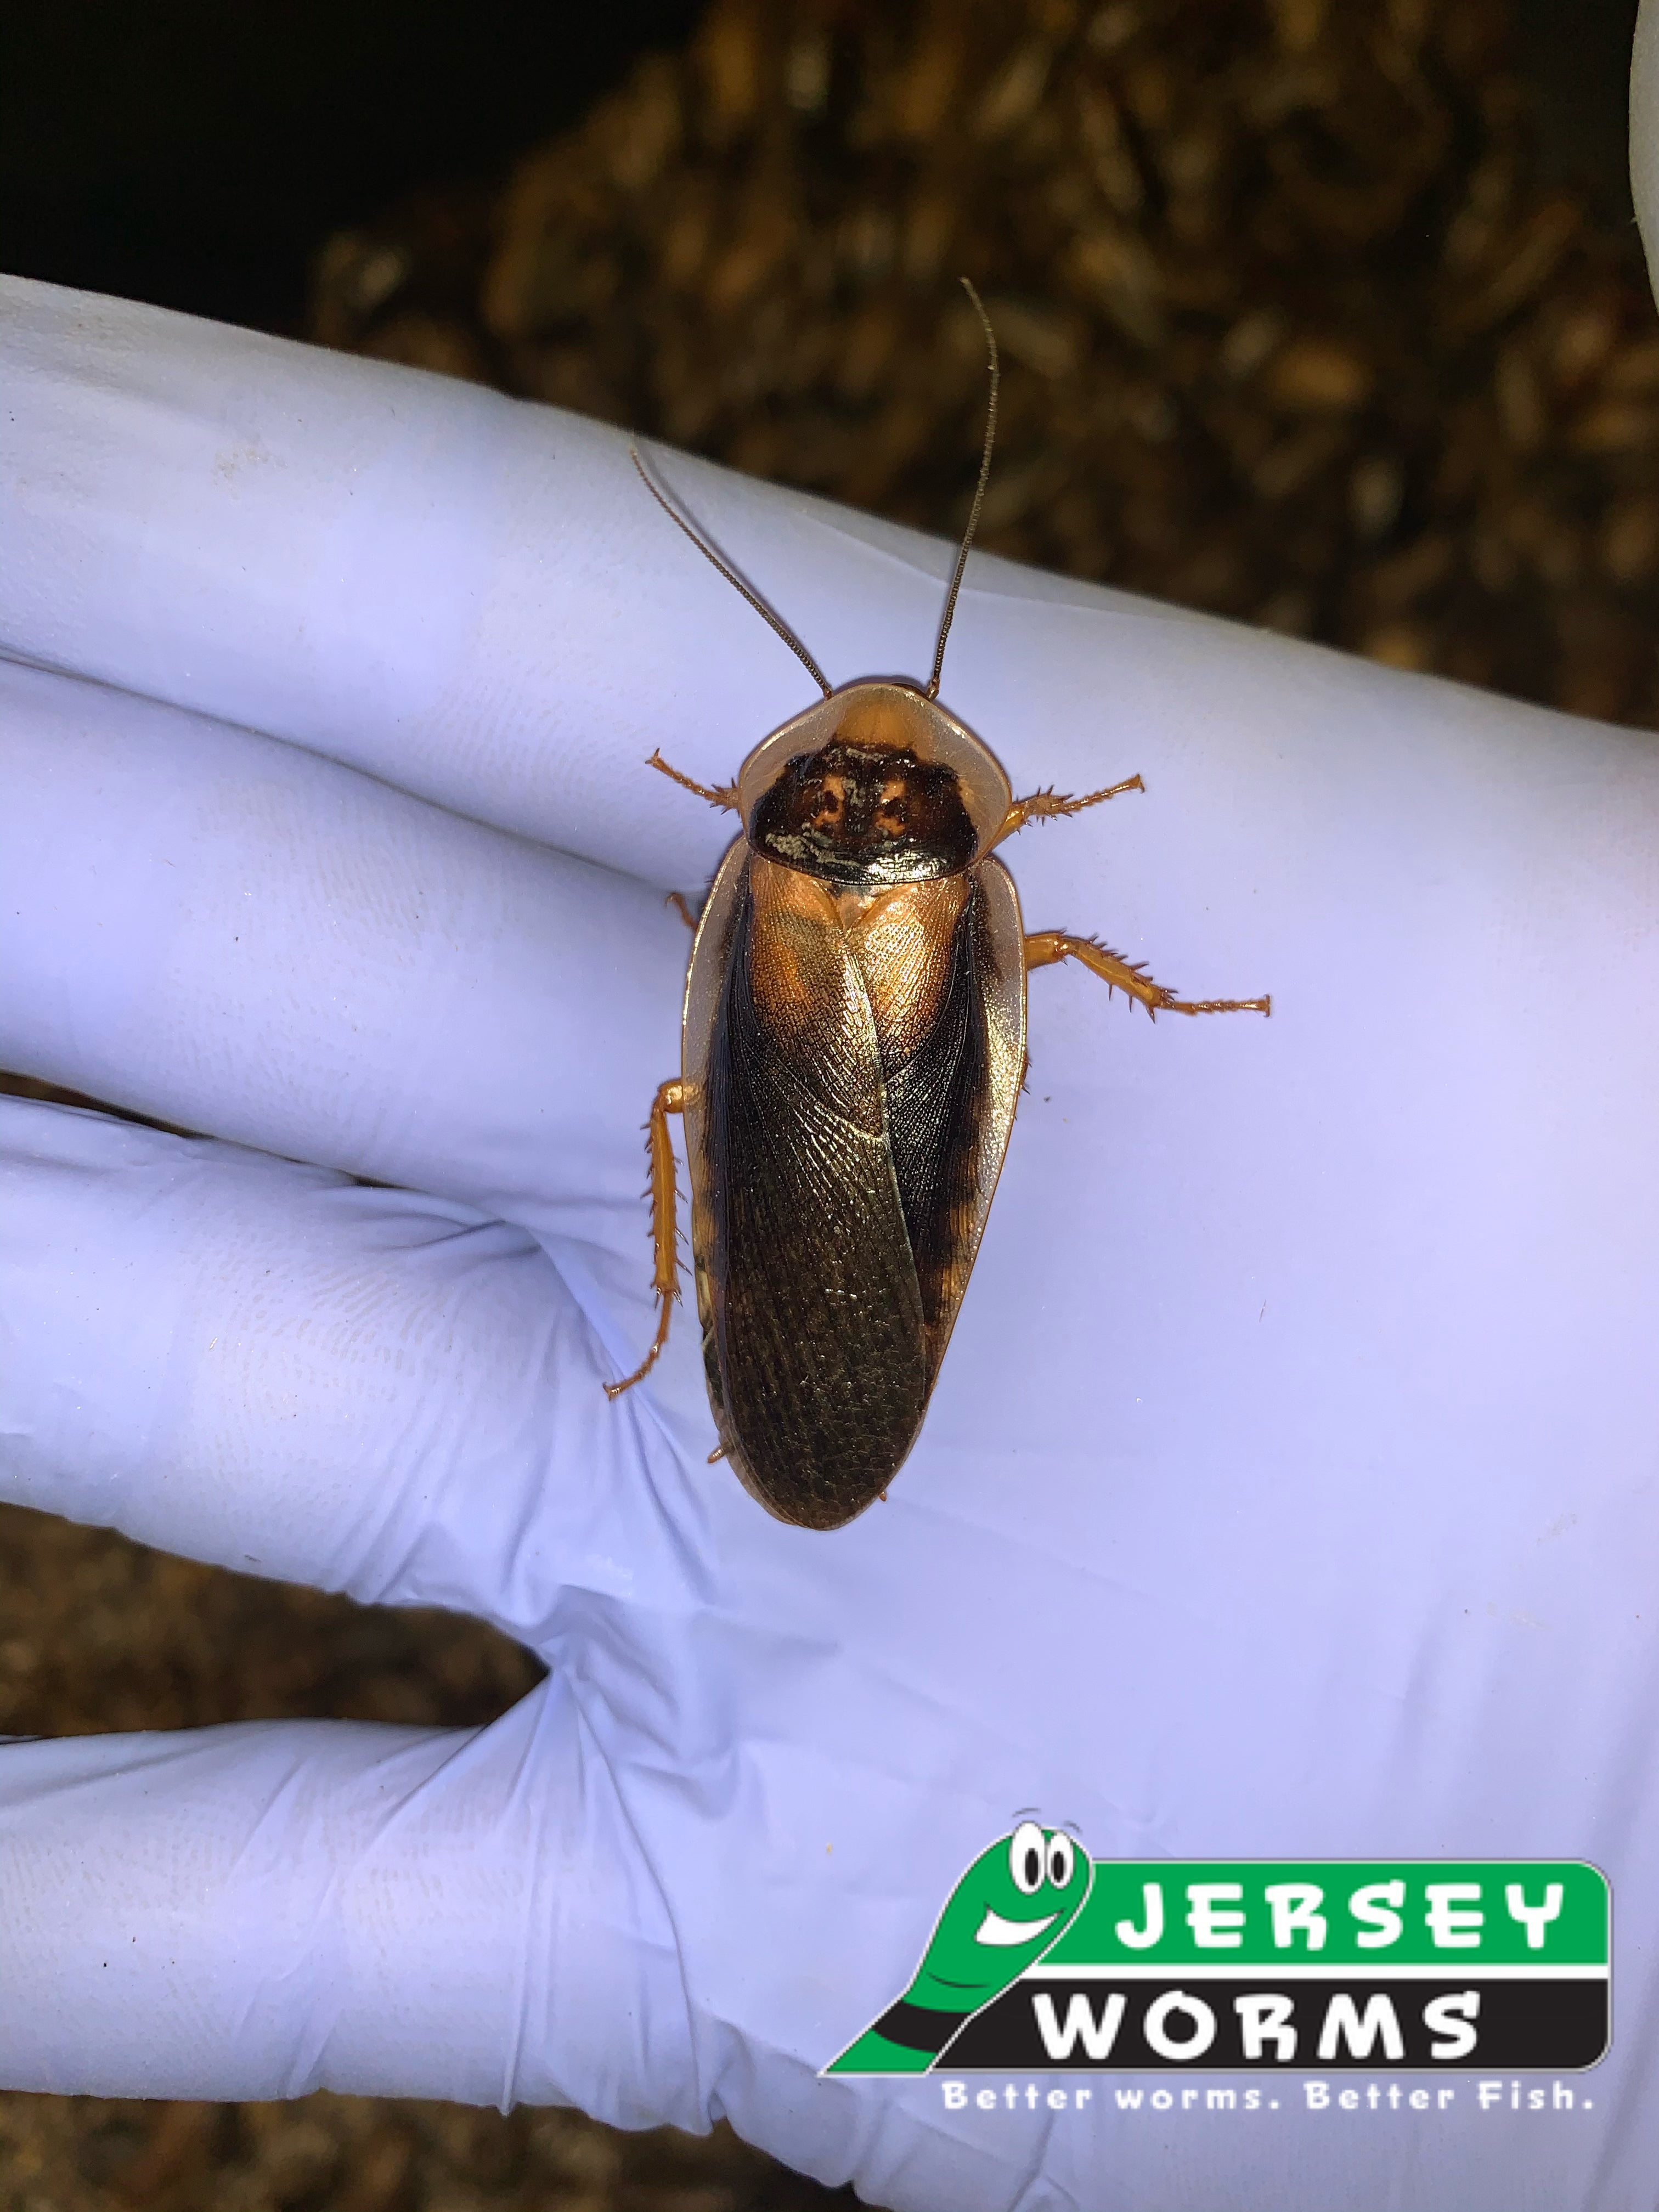 Adult Male Dubia roaches for sale